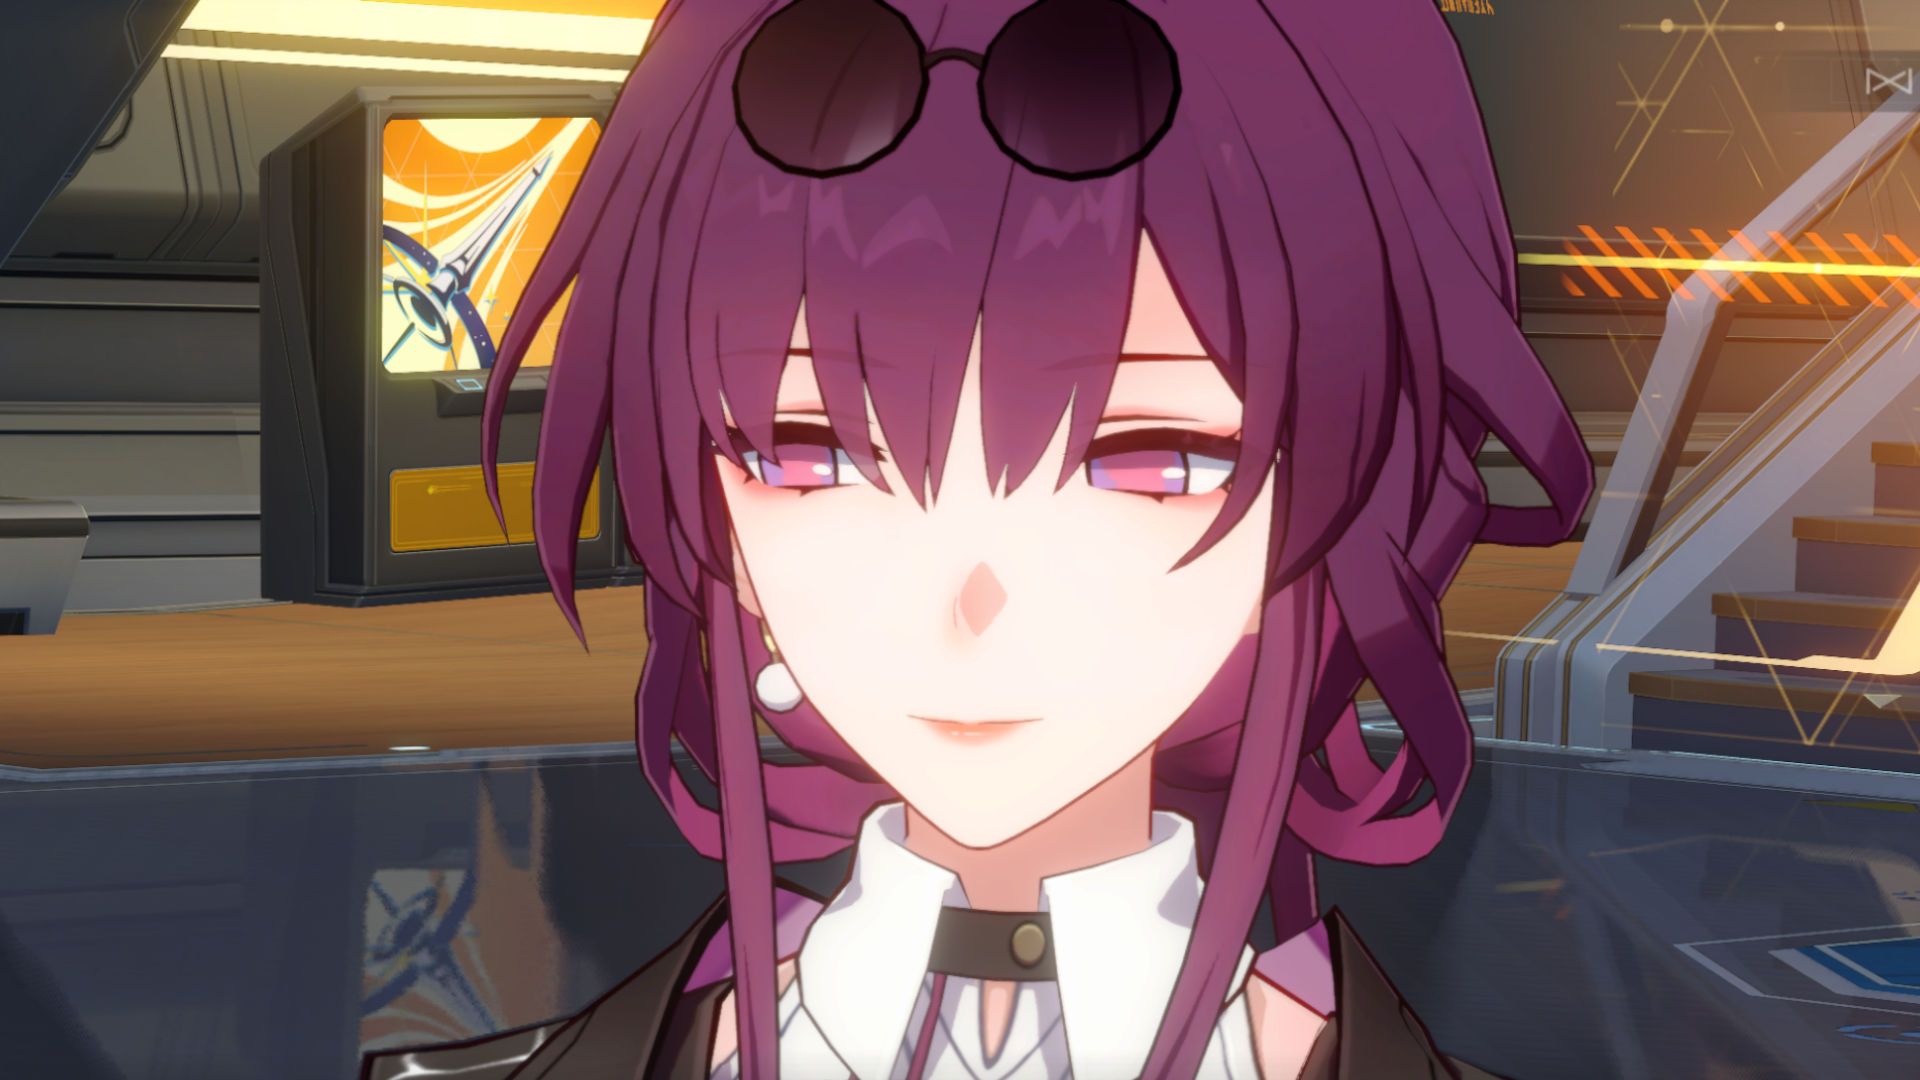 An-in game screenshot of Honkai: Star Rail's Kafka bust. She looks at something to the side, off-screen. She has shades on her head, but not over her eyes.